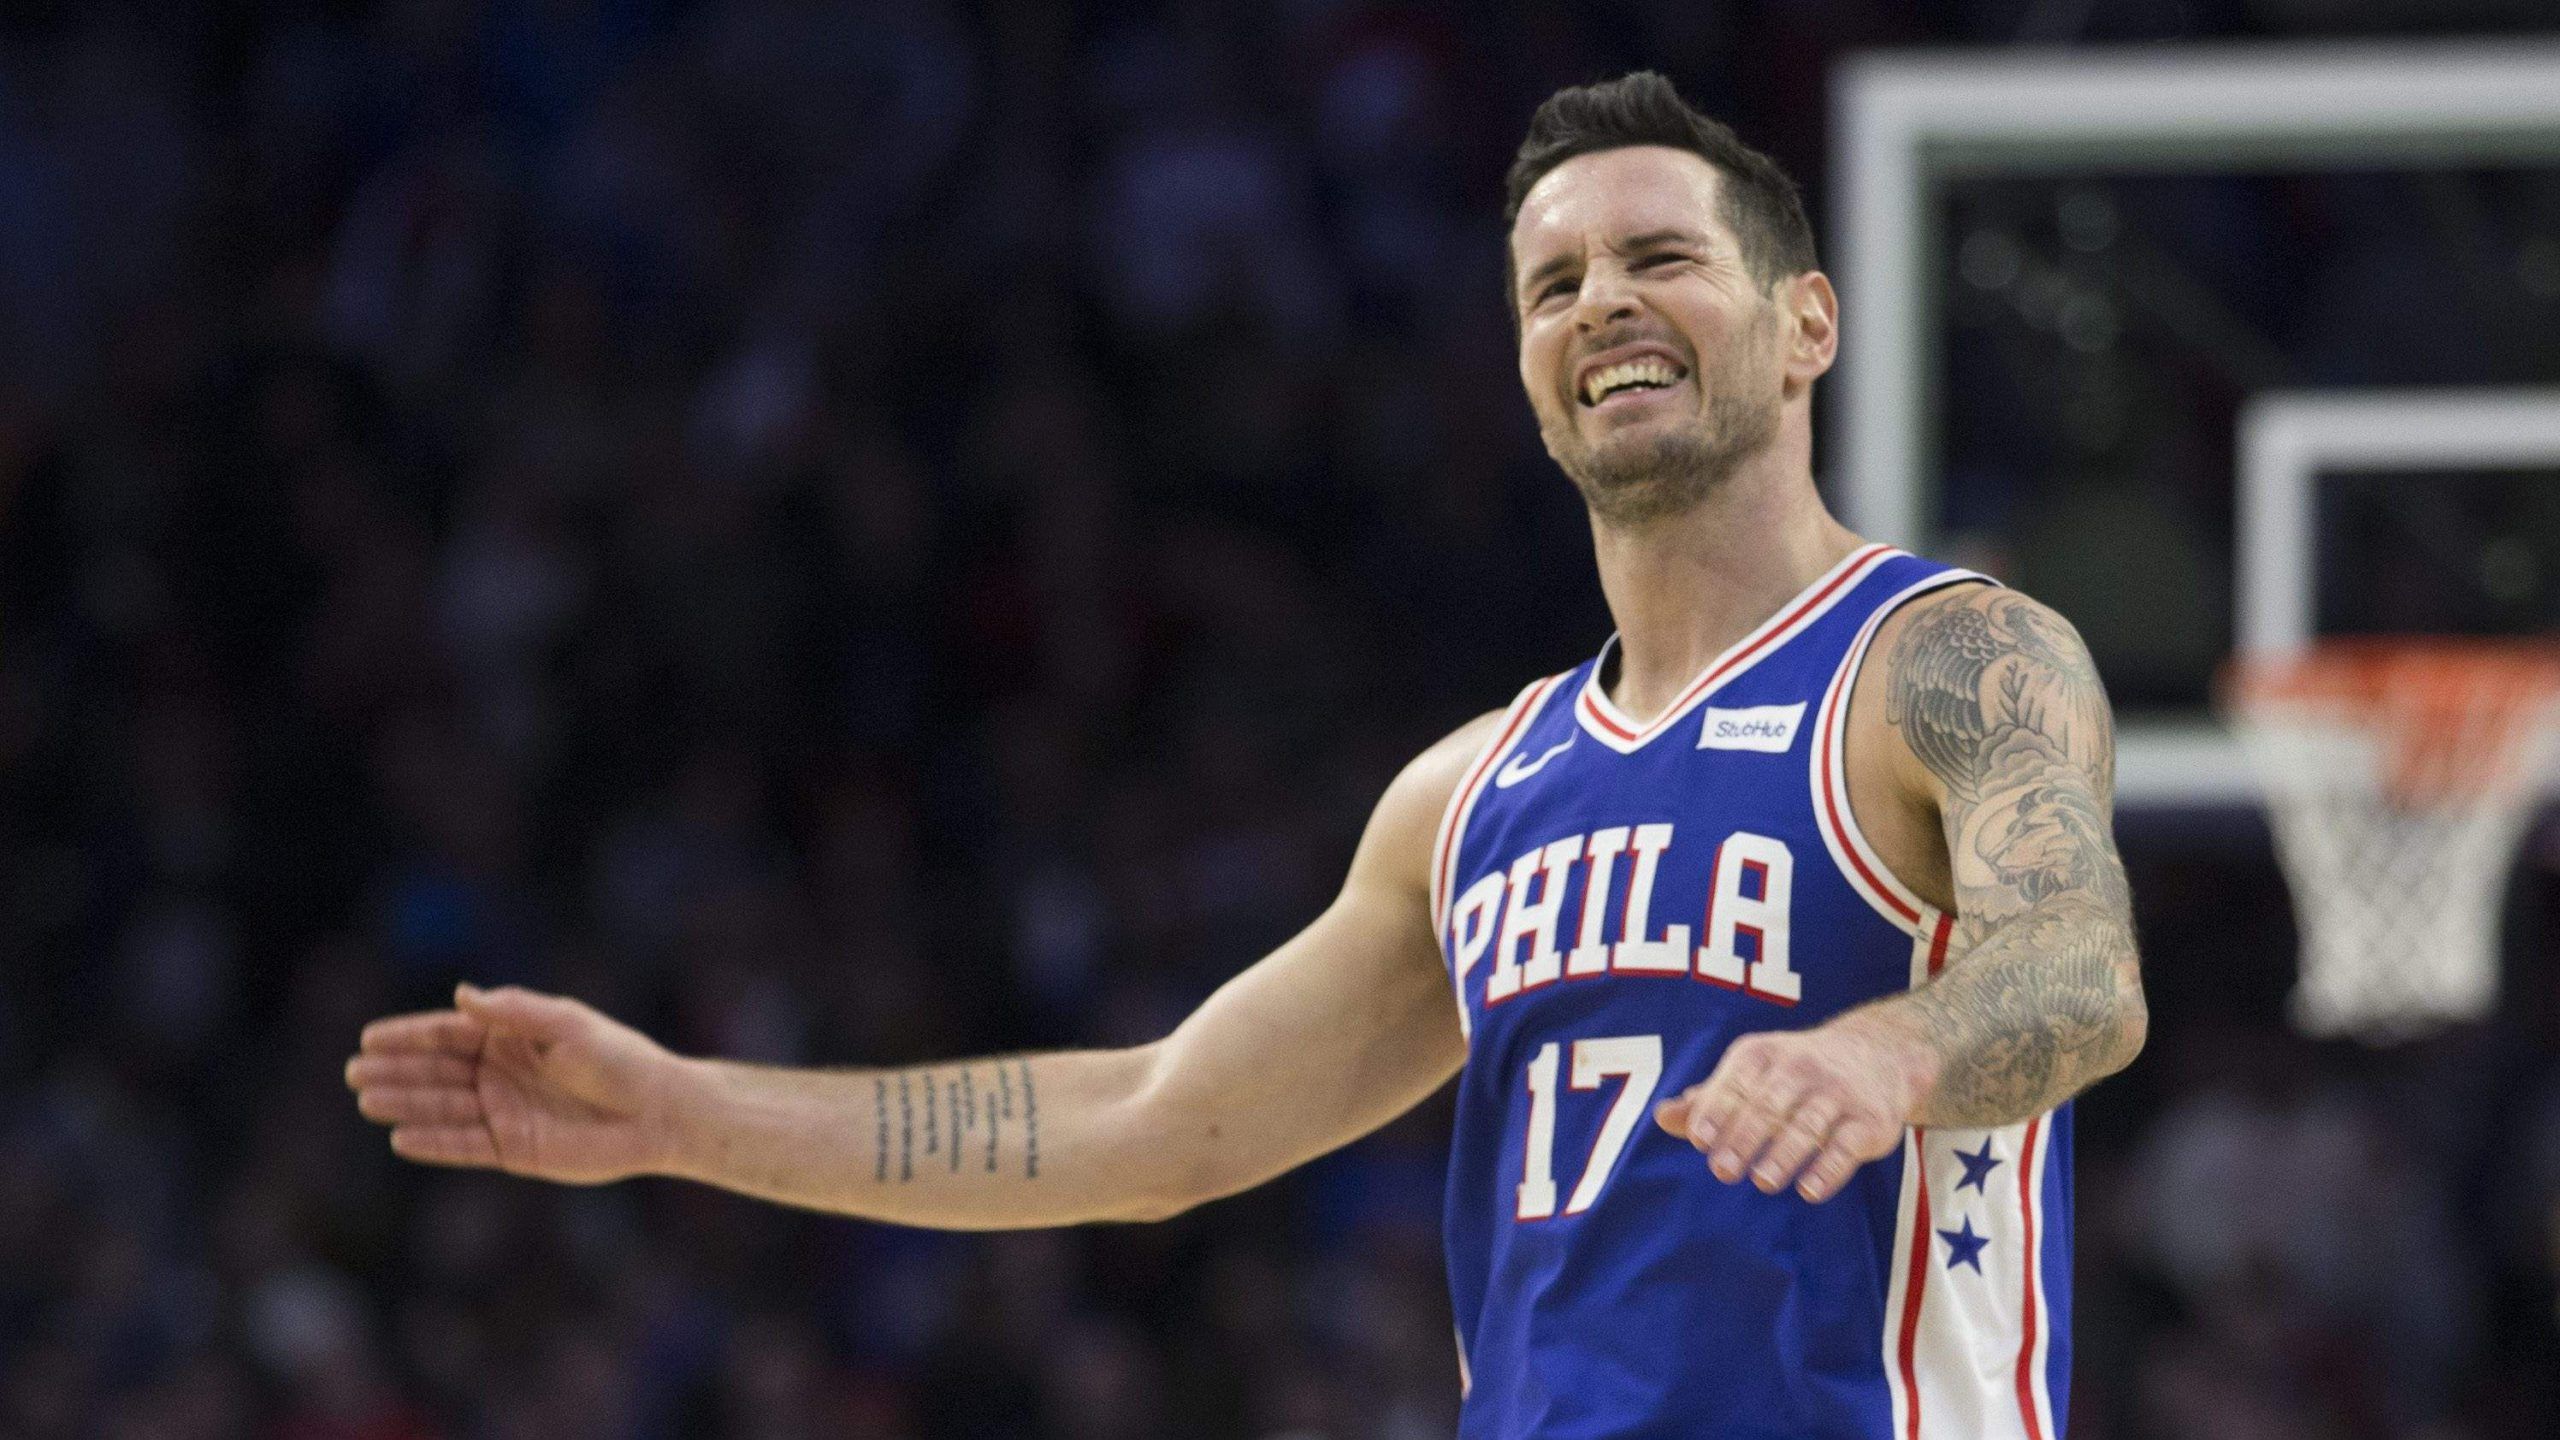 He's Lying: JJ Redick Takes a Hilarious Dig at New Orleans Pelicans Head Coach During Press Conference